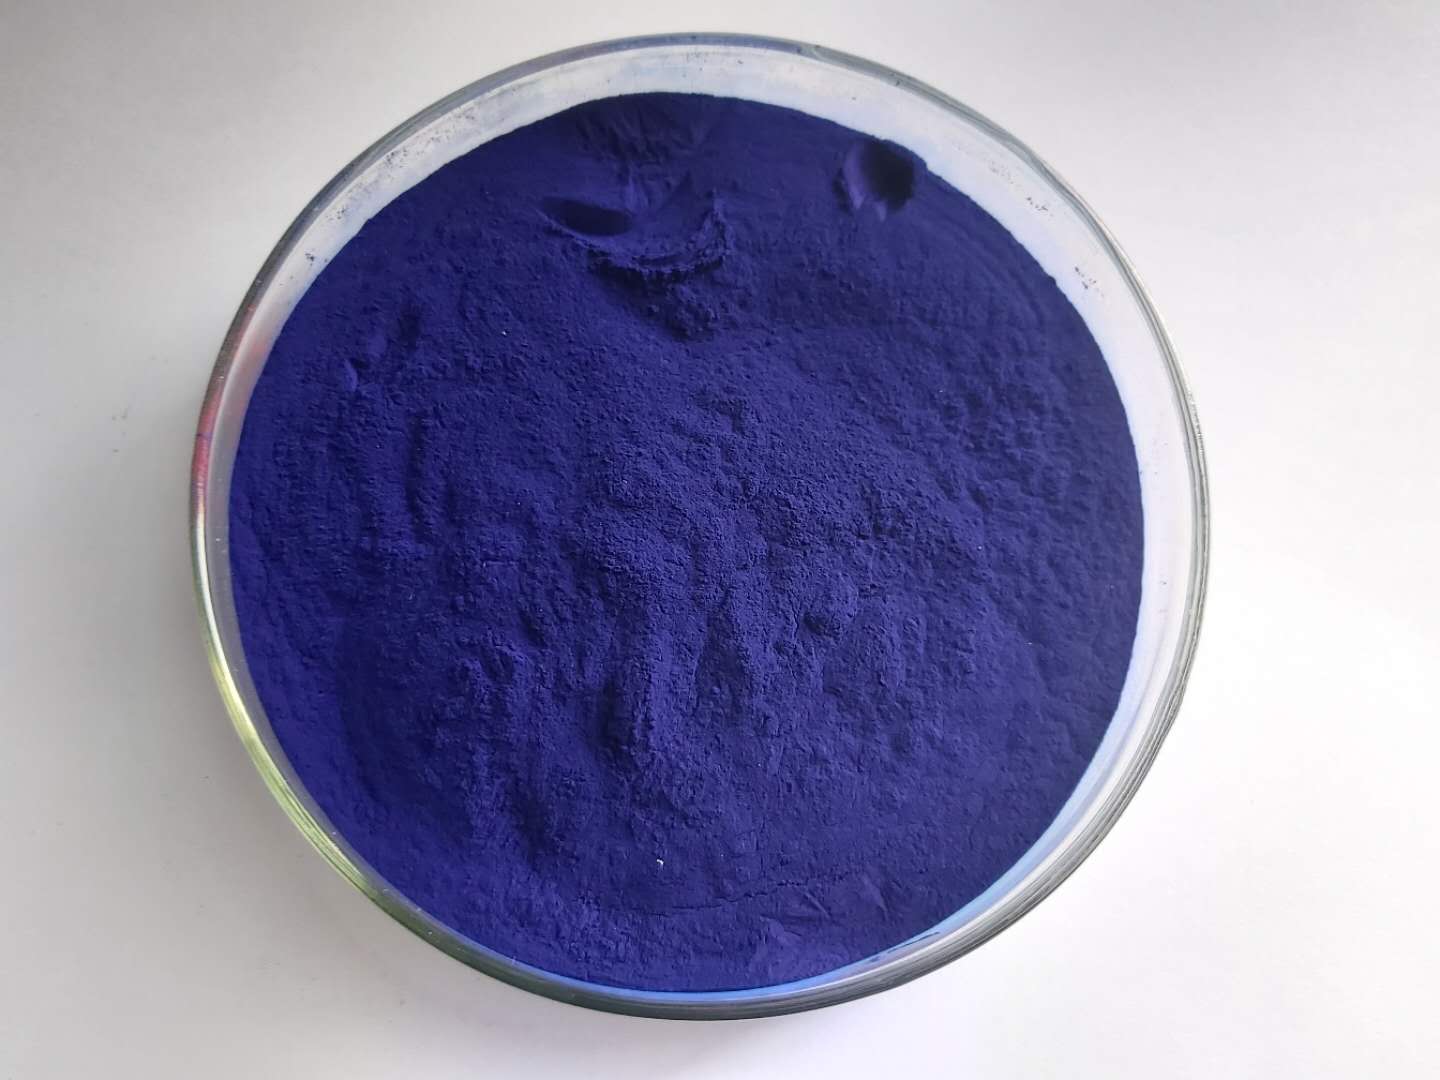 Pigments for Untreated Seeds Powder Pigment Blue B1 For SP/SL